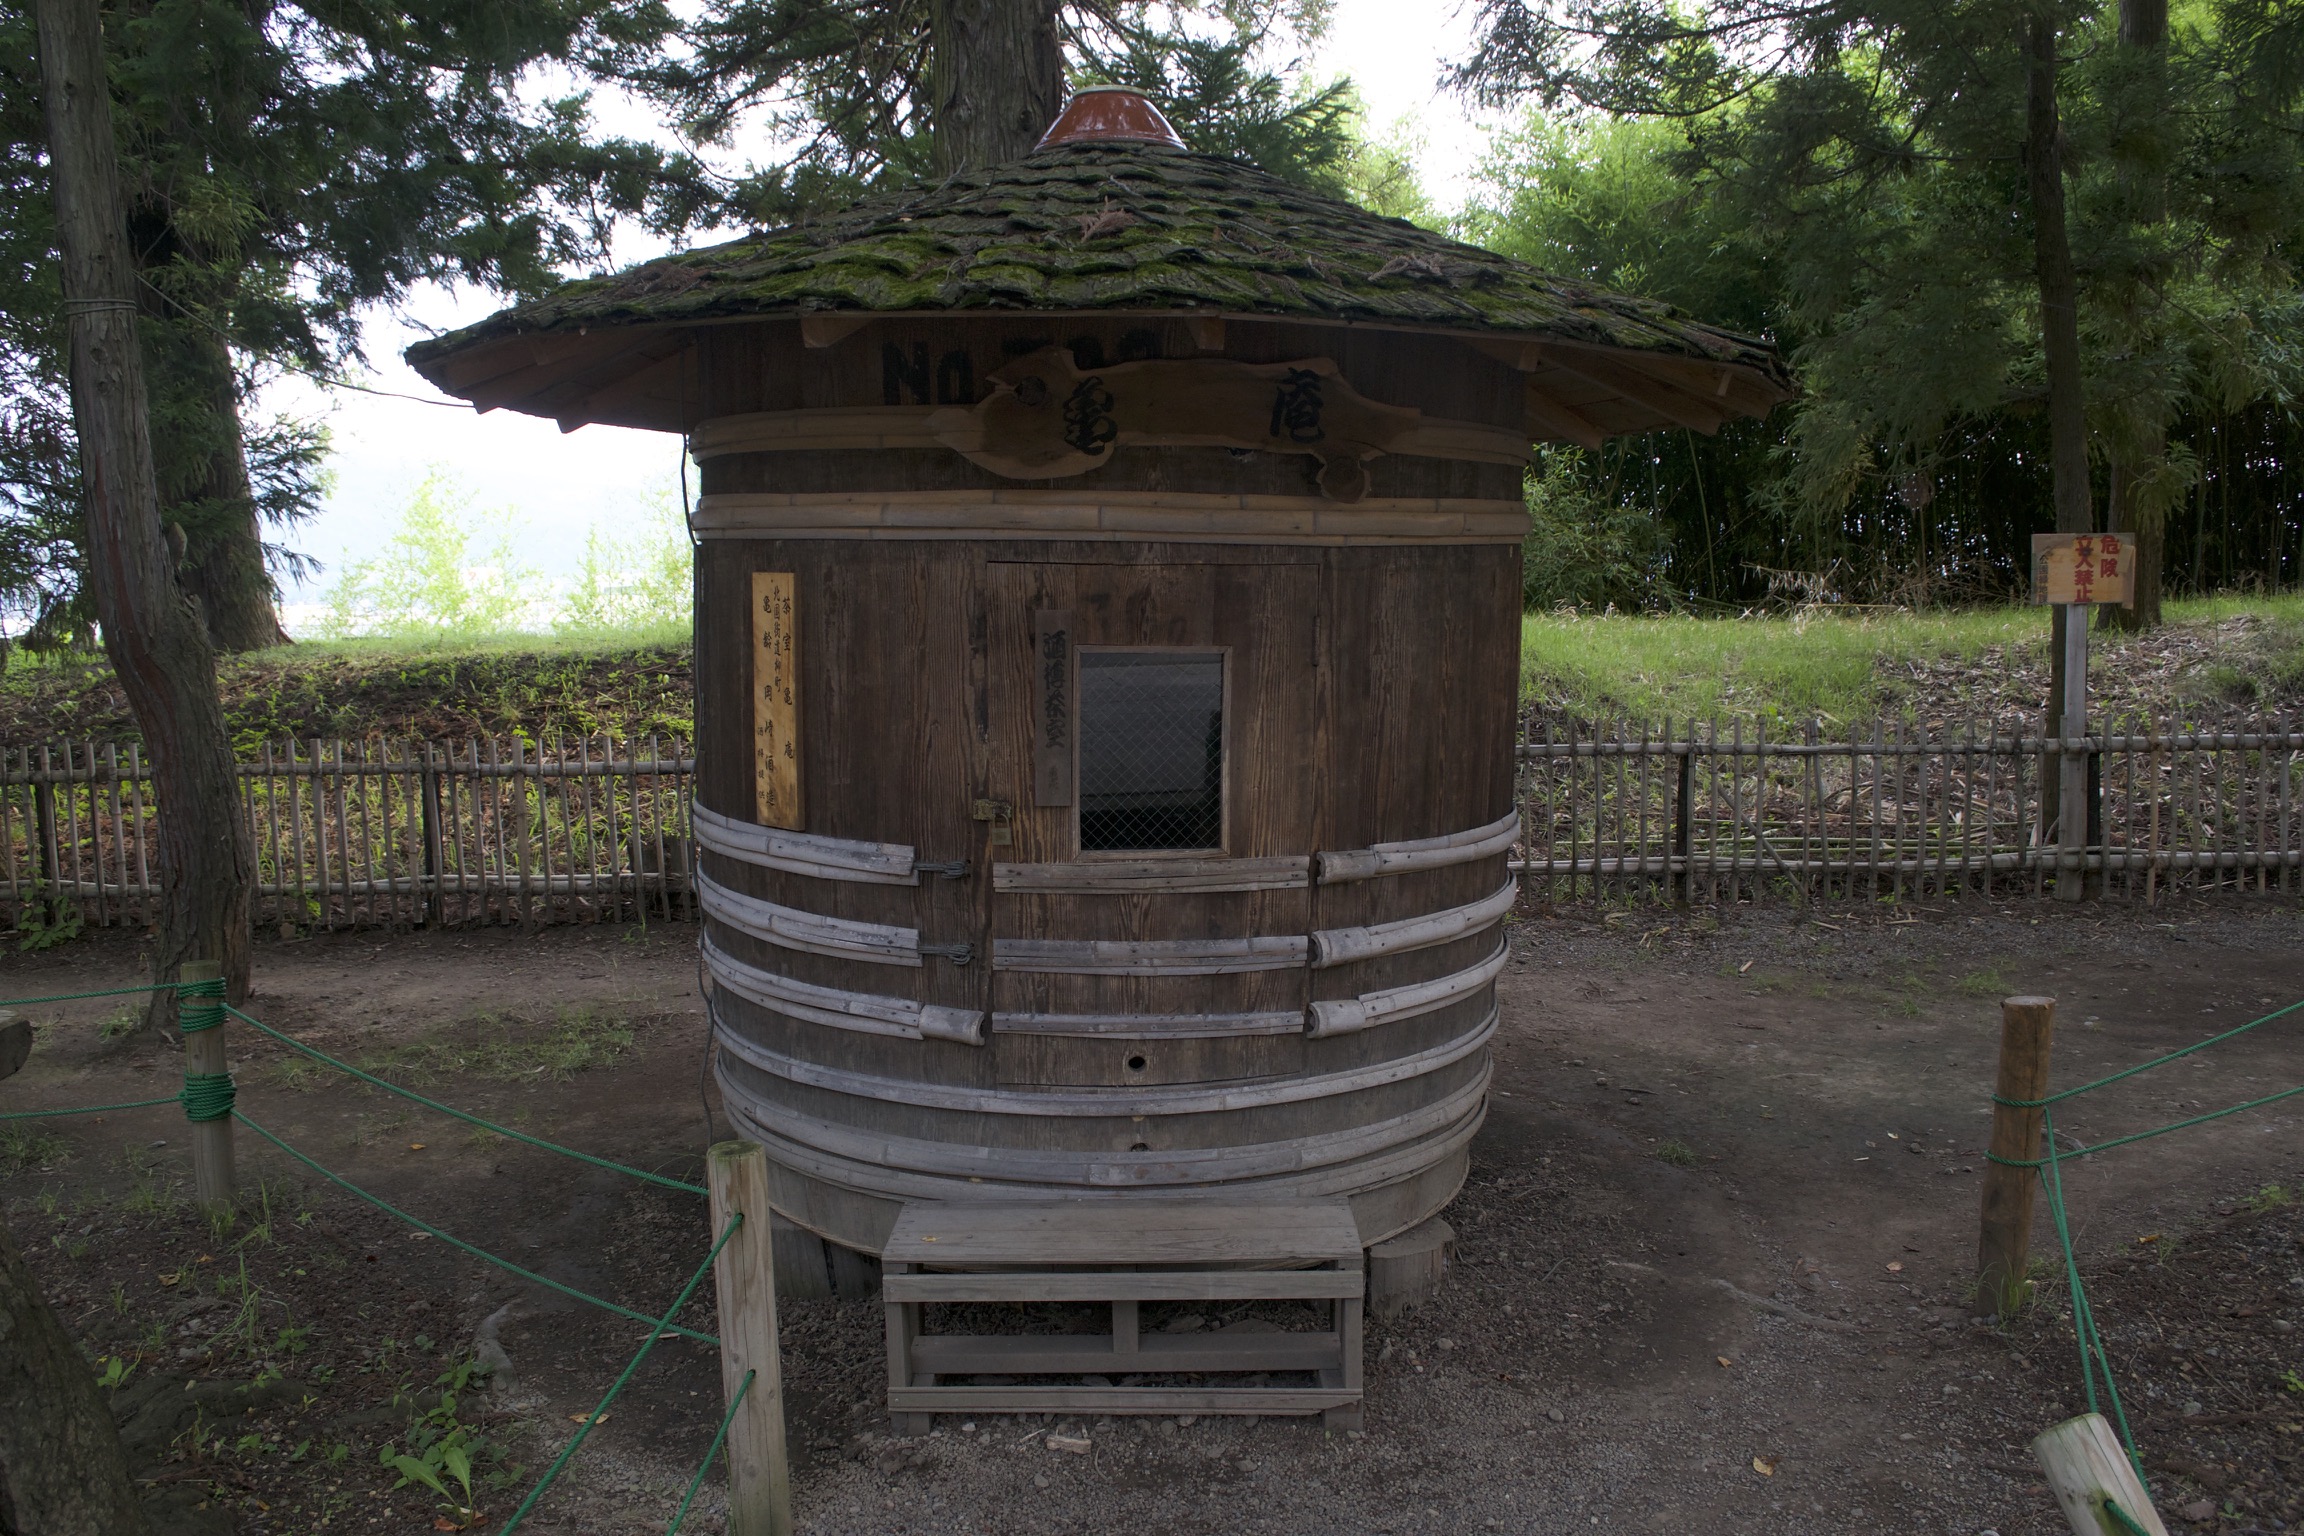 A big wooden barrel with a mossy roof.